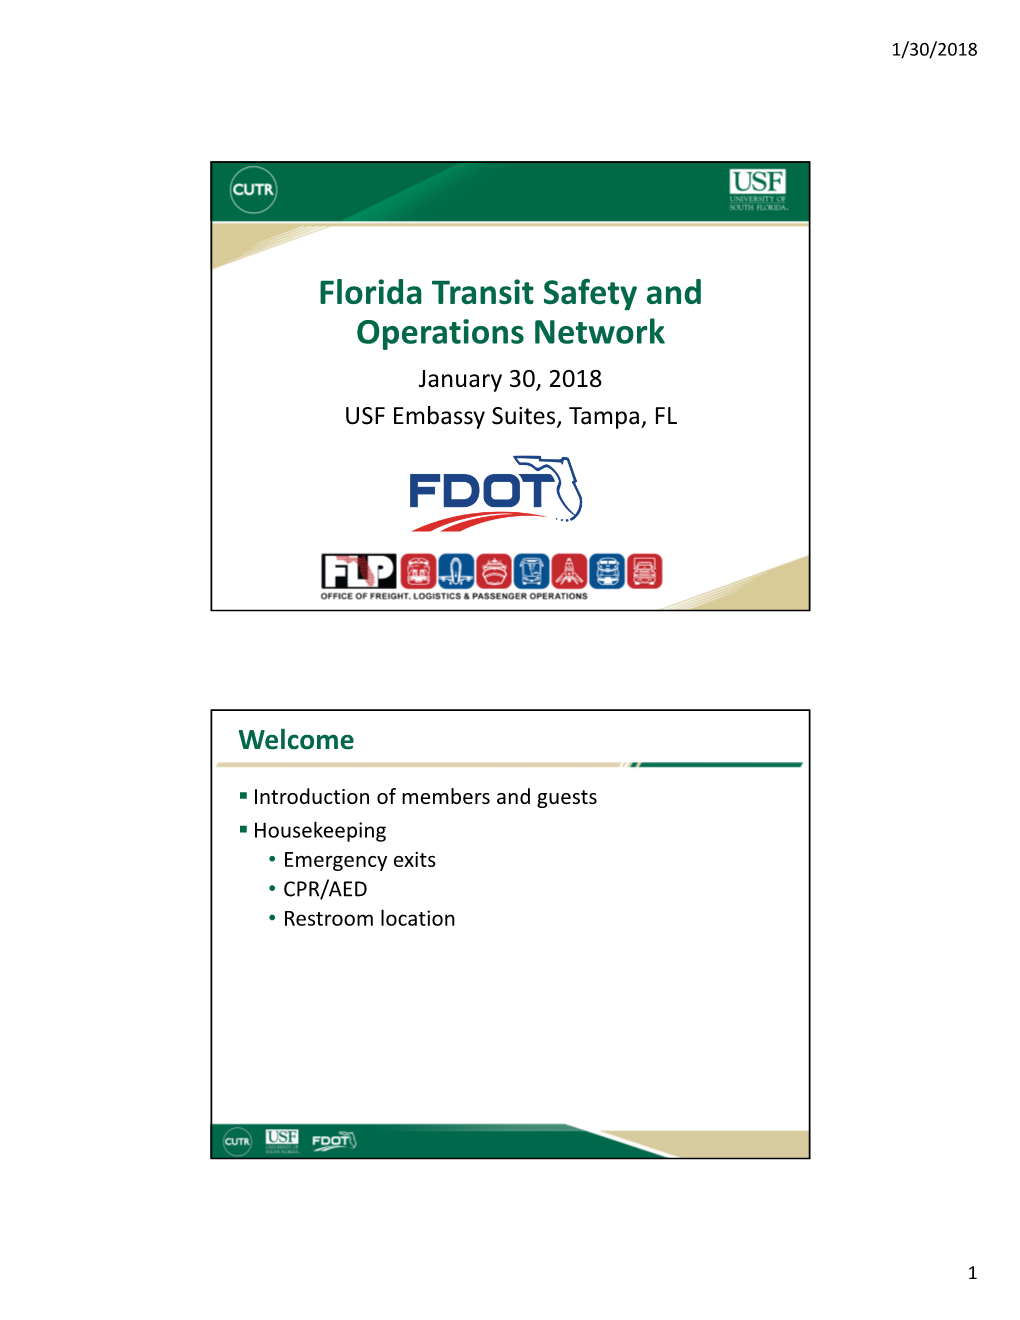 Florida Transit Safety and Operations Network January 30, 2018 USF Embassy Suites, Tampa, FL